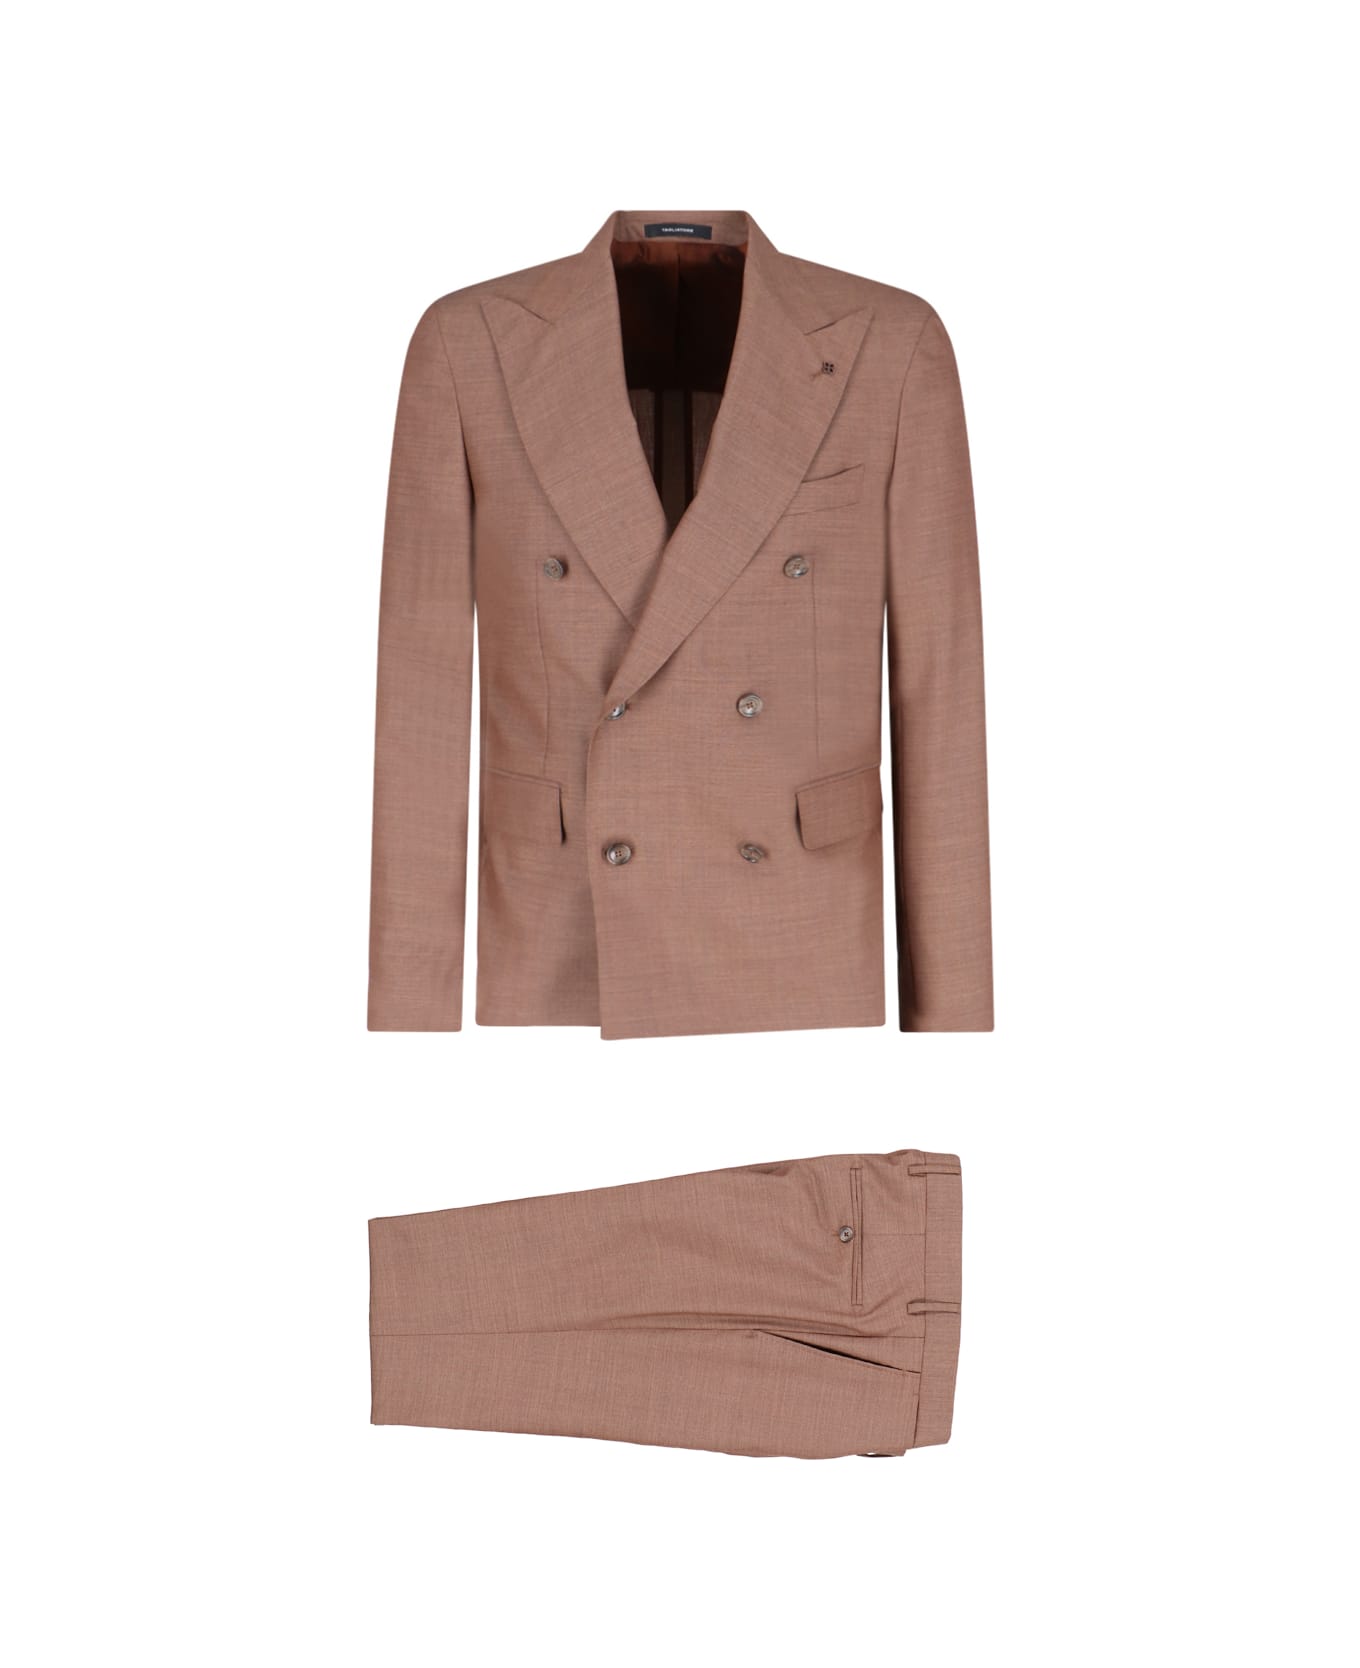 Tagliatore Double-breasted Suit - K1070